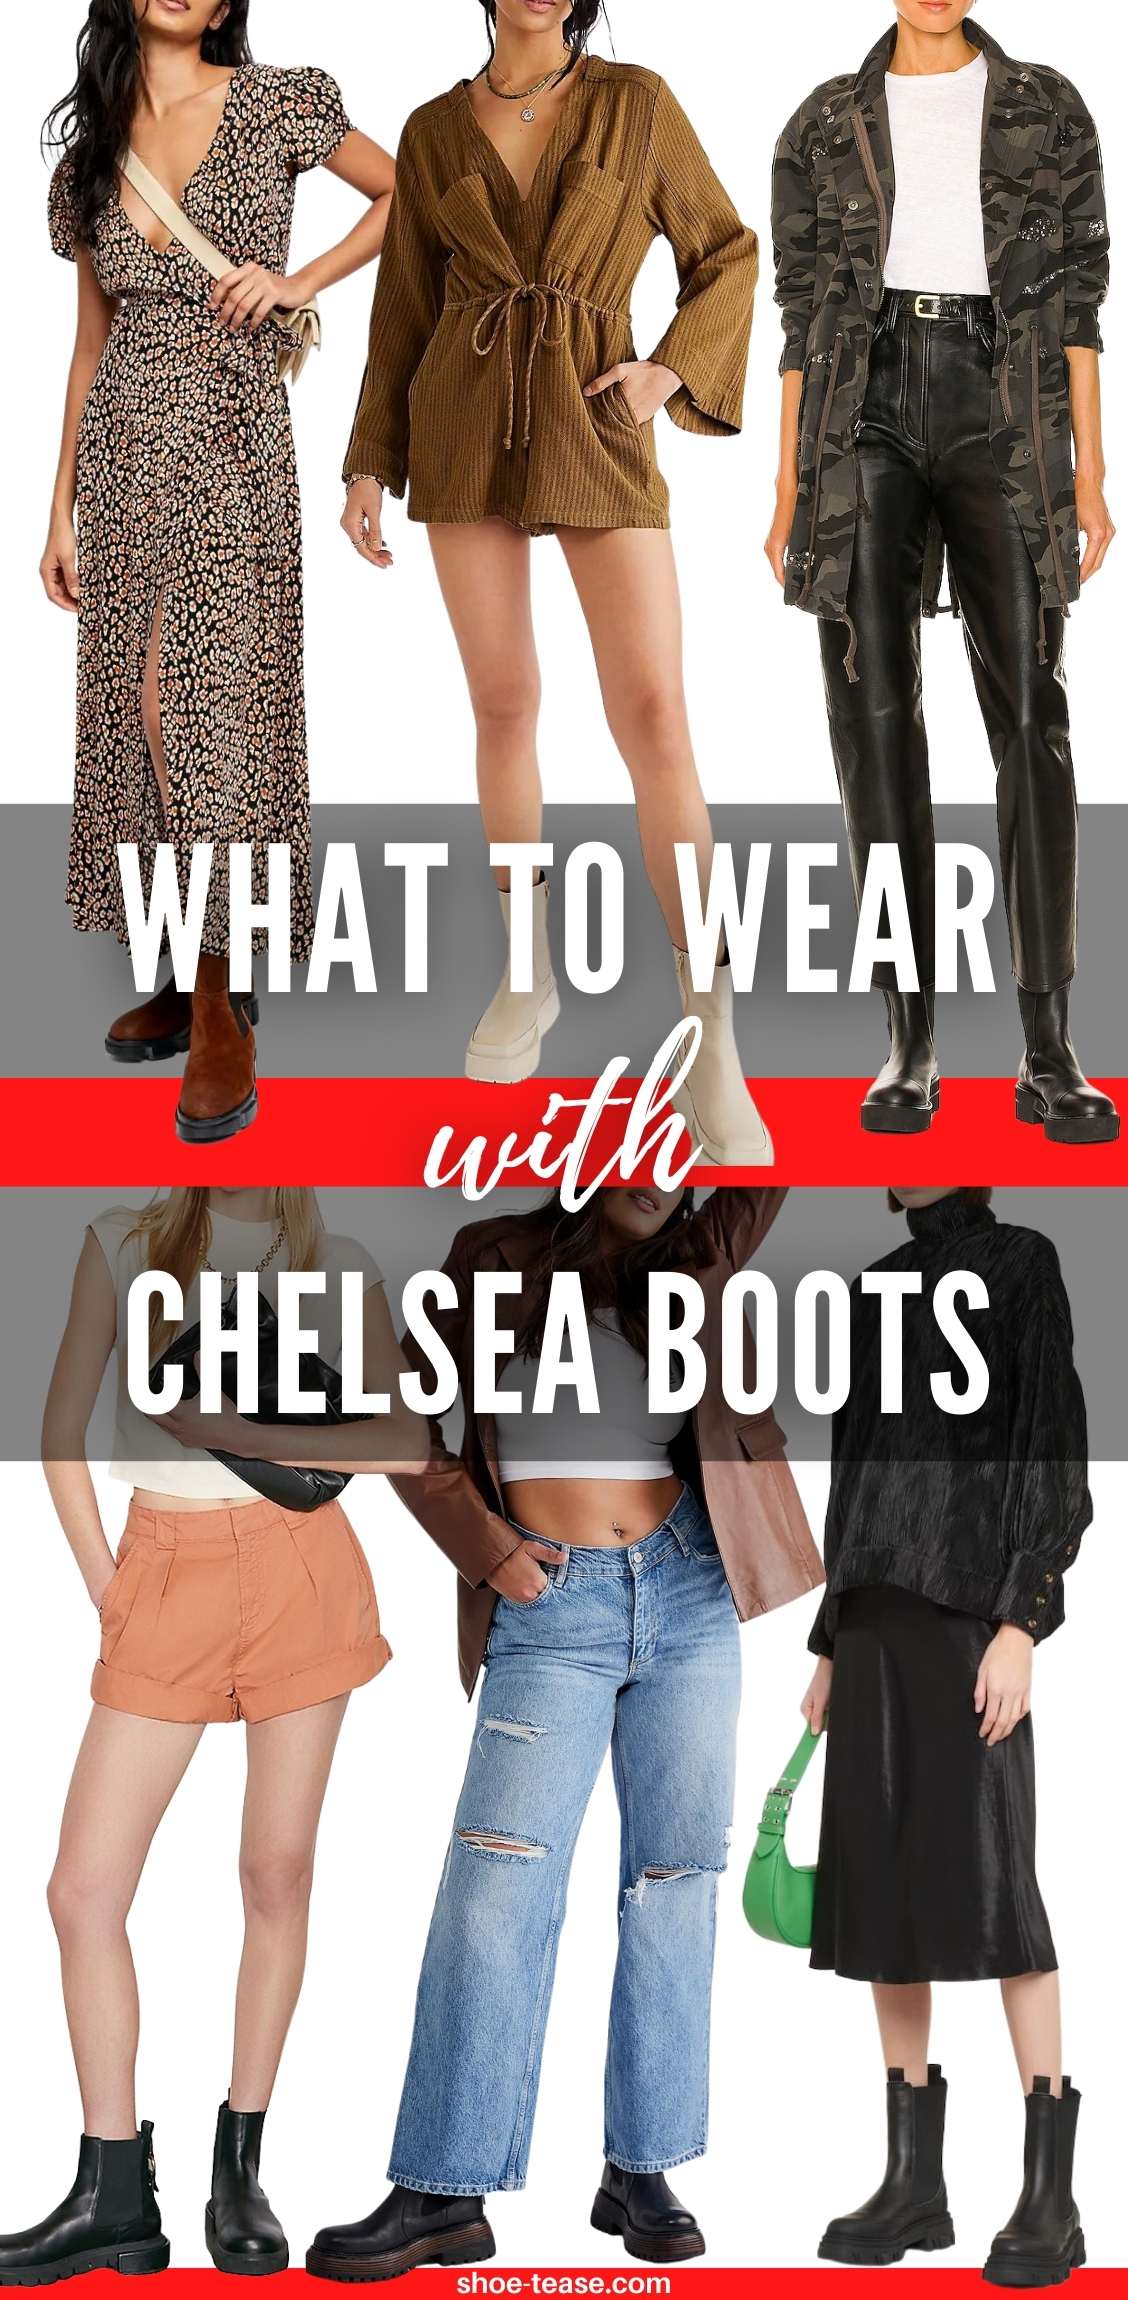 tjenestemænd elev Skov How to Wear Chelsea Boots Outfits for Women - 22 Great Looks!